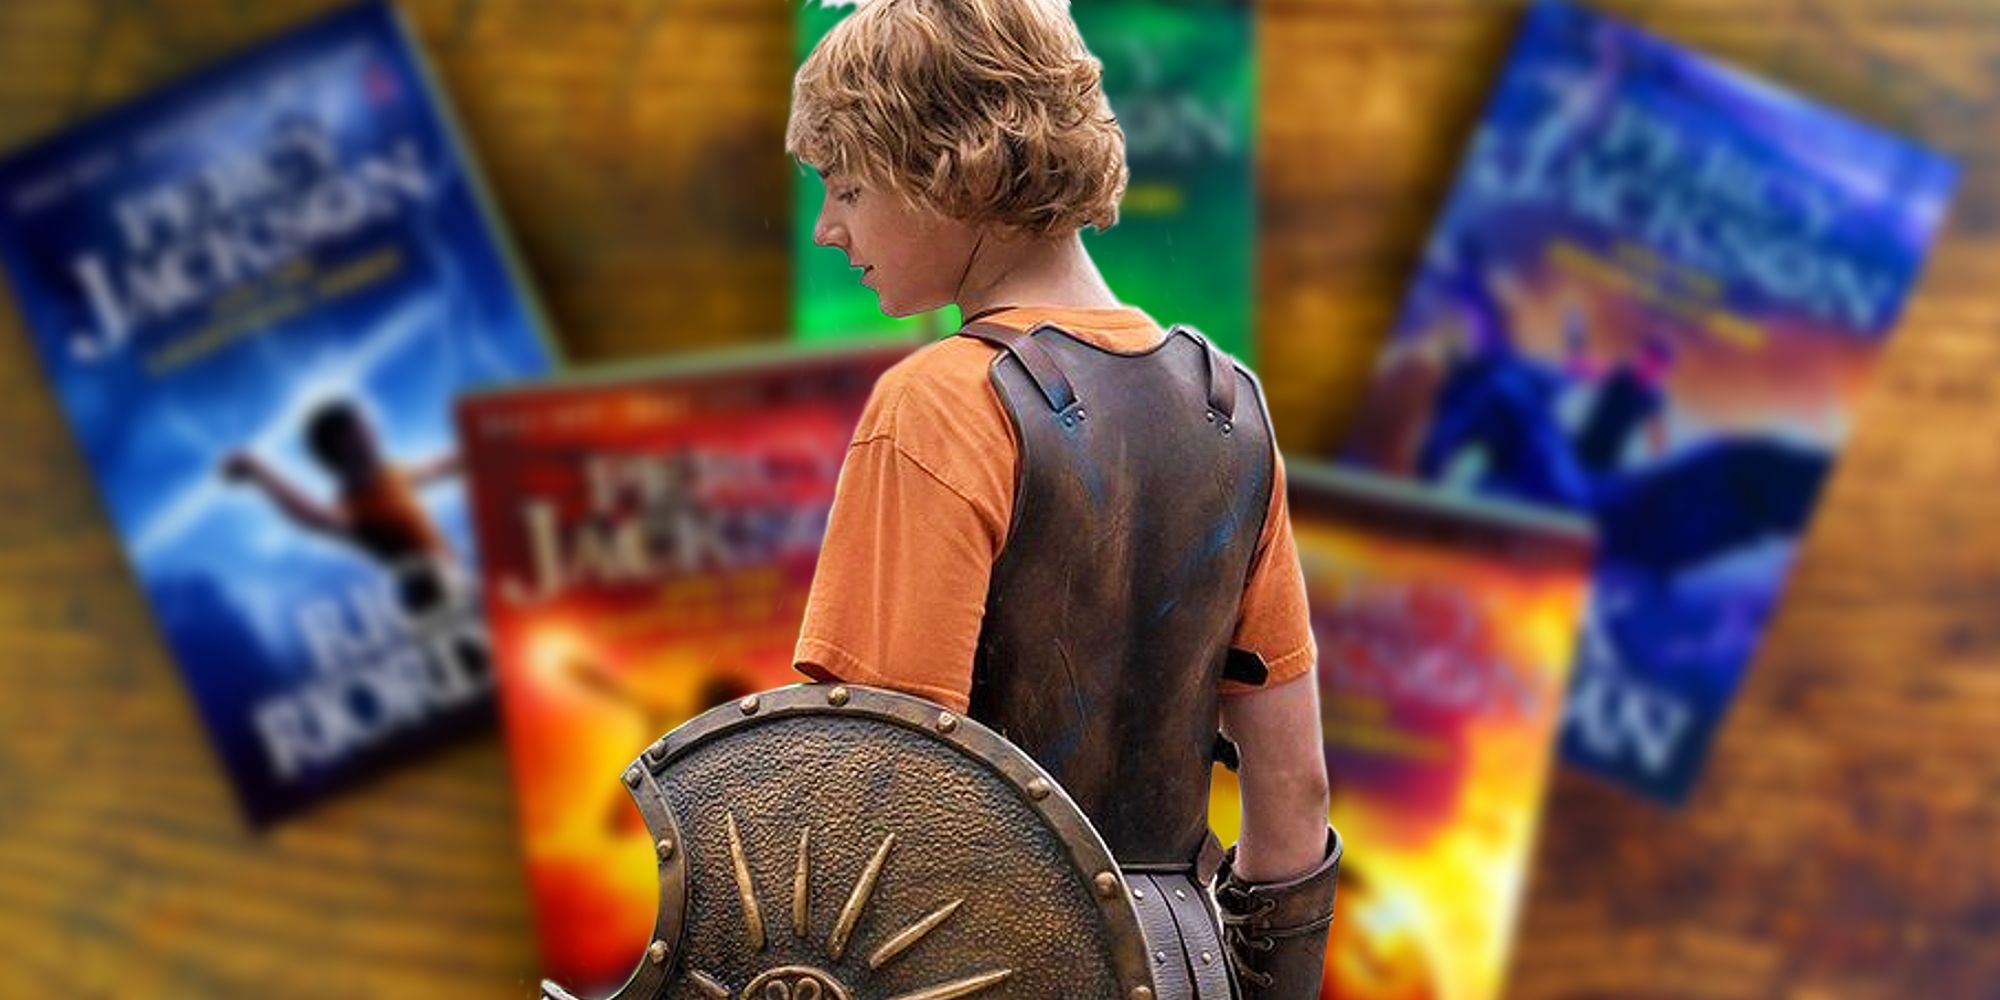 Walker Scobell as Percy Jackson holding a shield in the Disney+ show atop a blurred image of the Percy Jackson book series